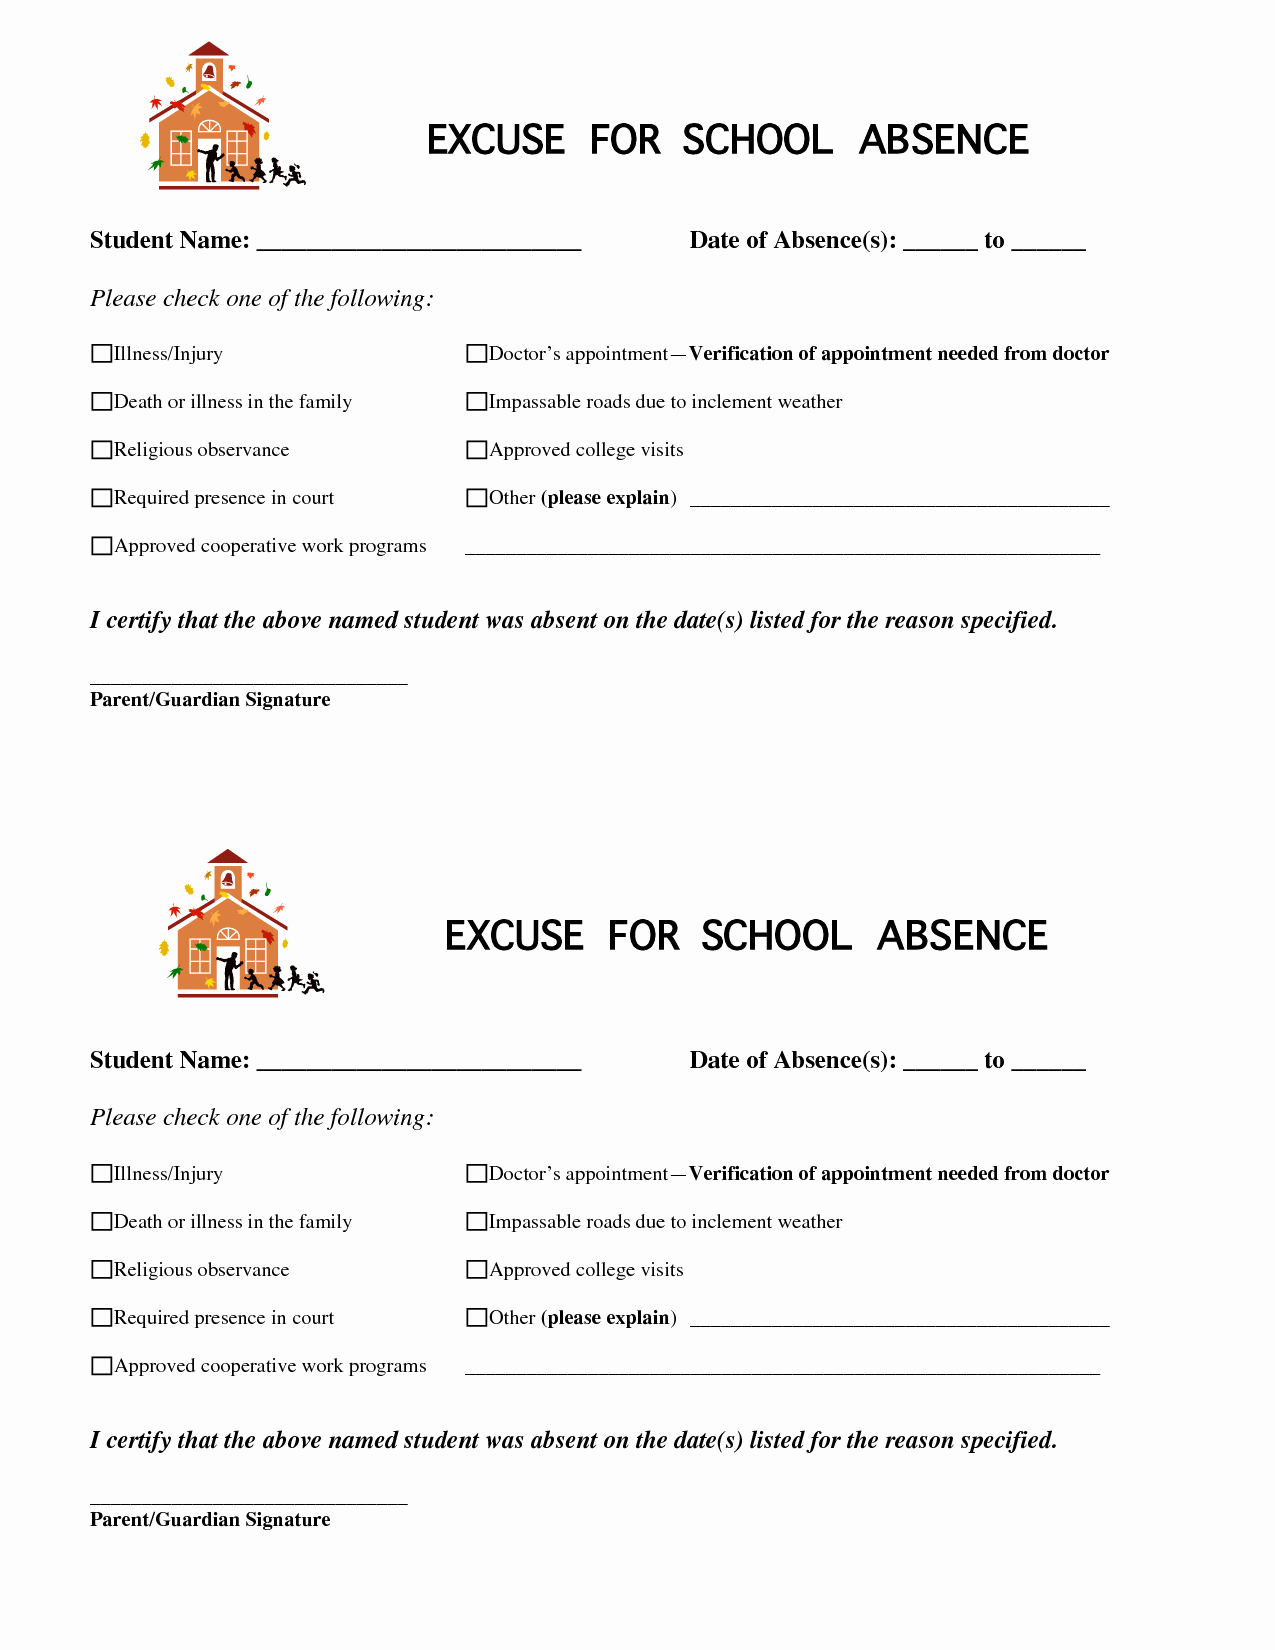 Dr Excuse for School Fresh 8 Best Of Printable for School Absence Excuses